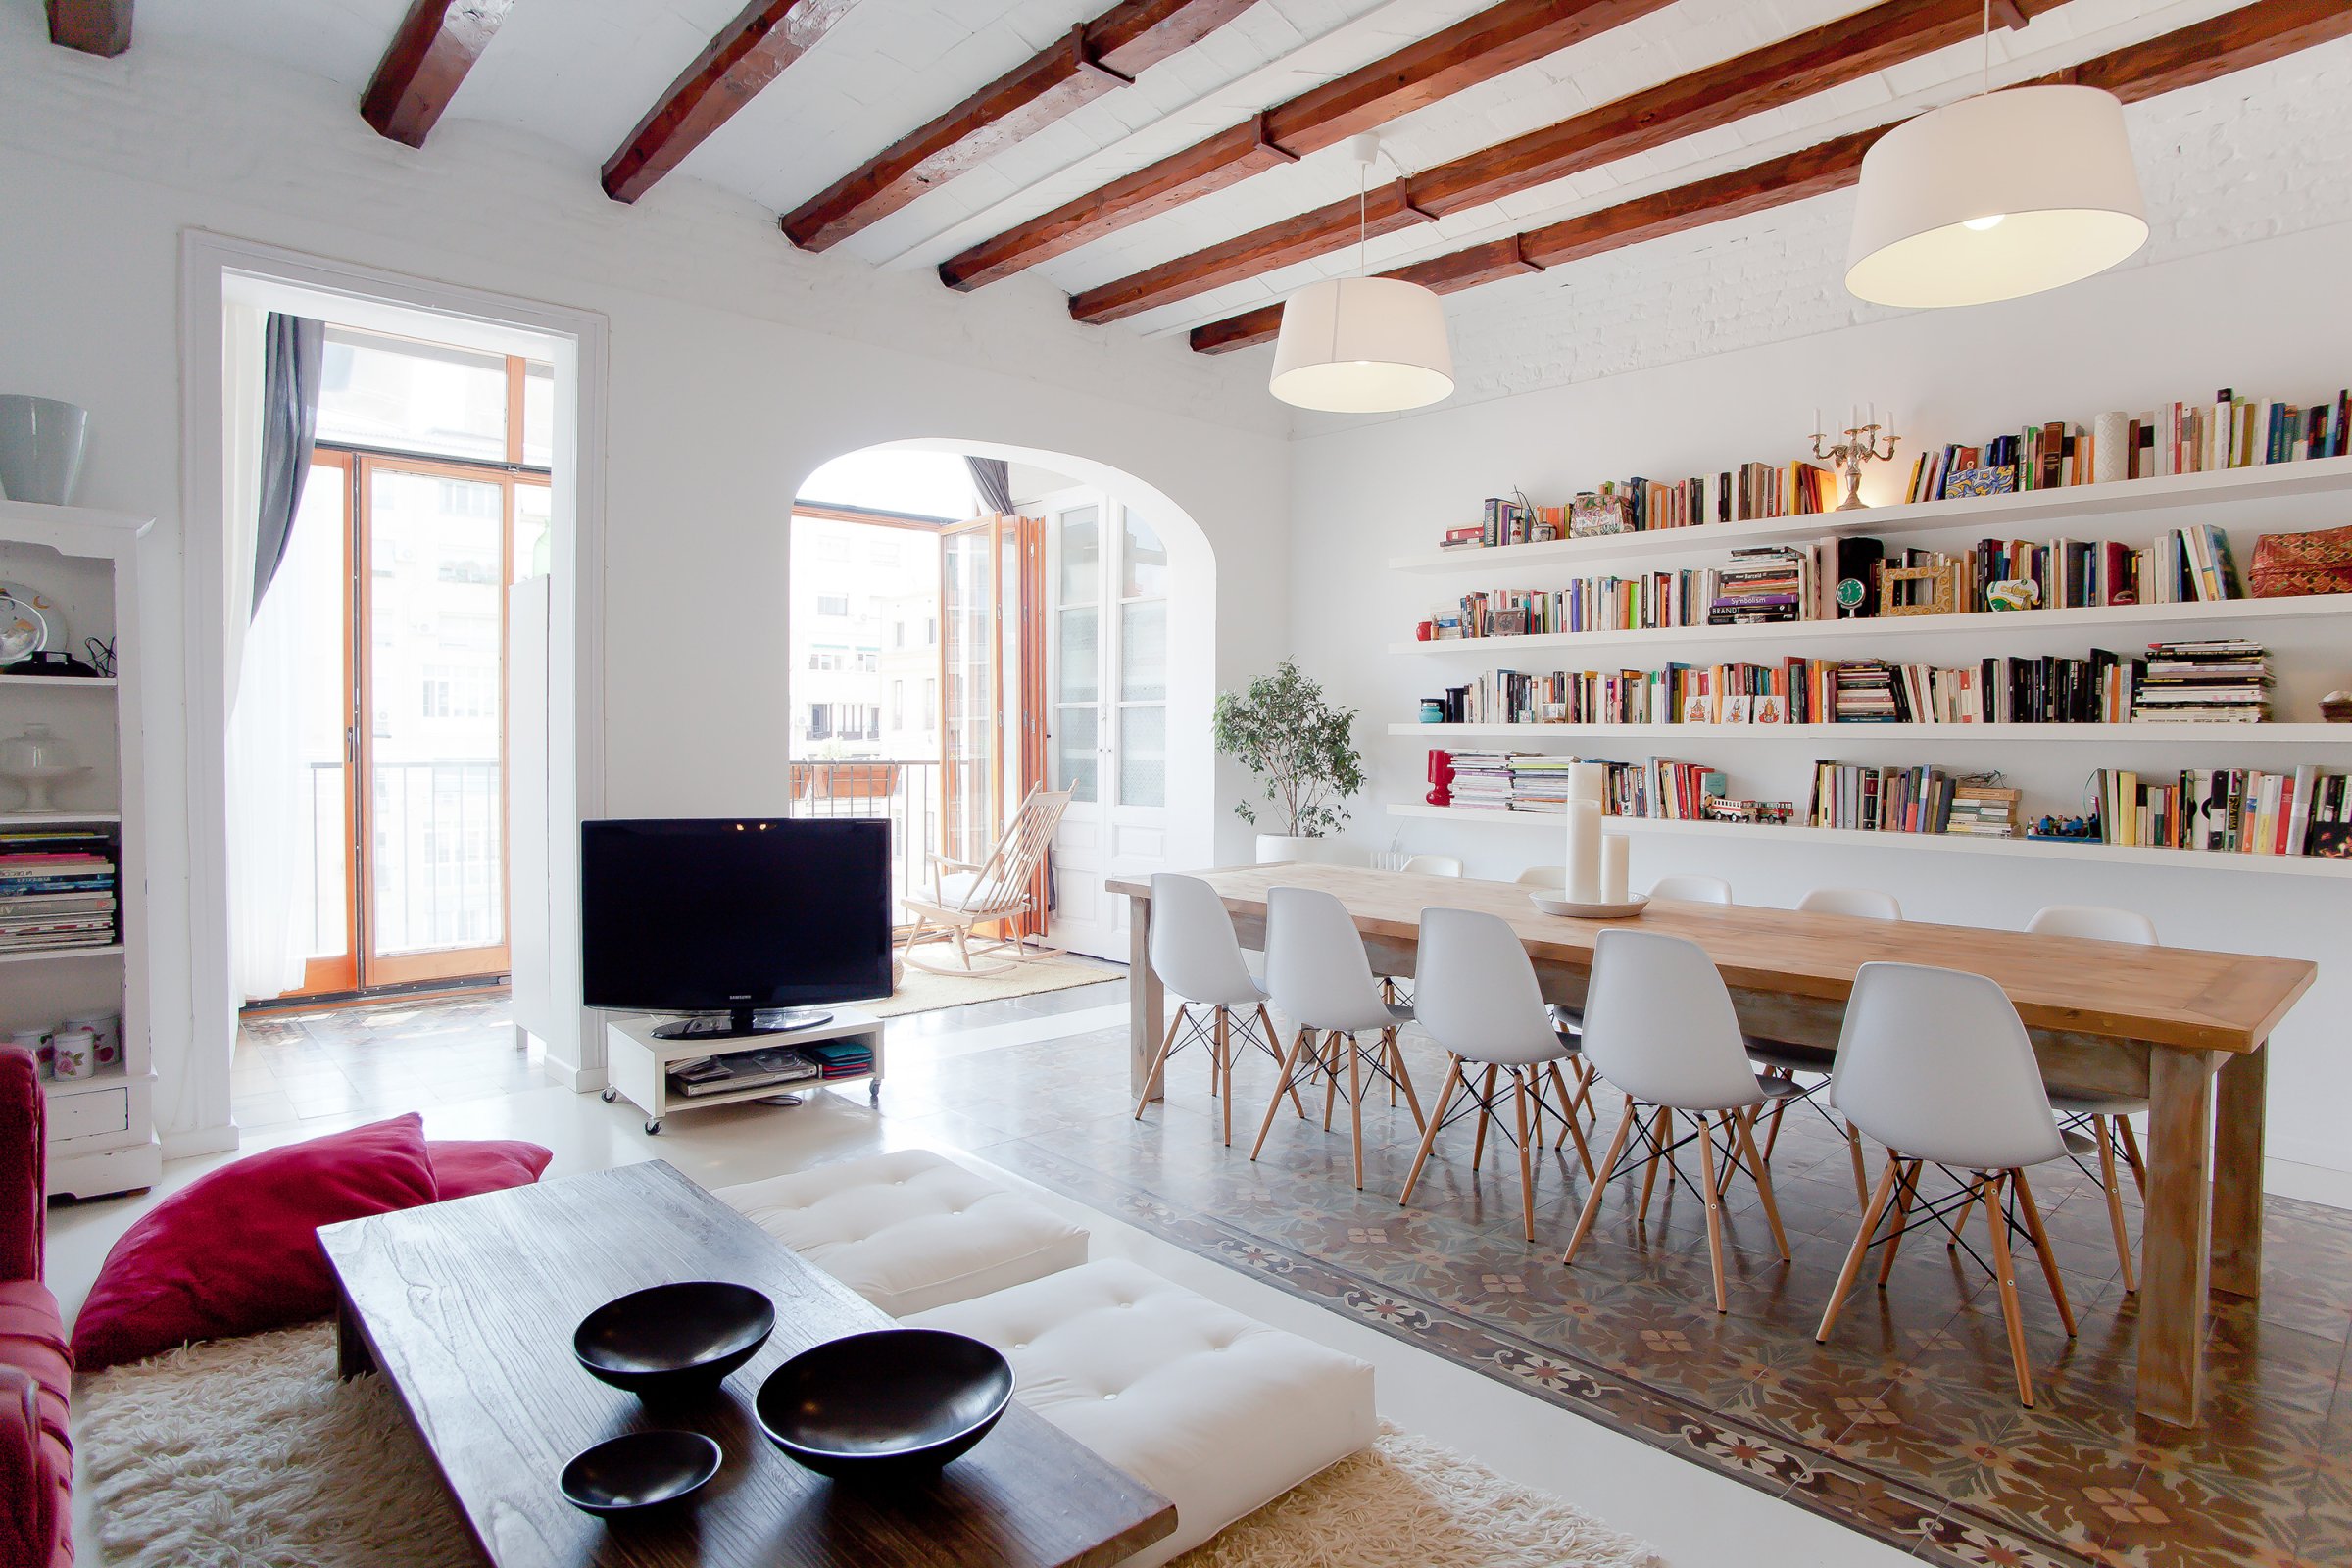 Apartment in Barcelona, Spain offered through airbnb.